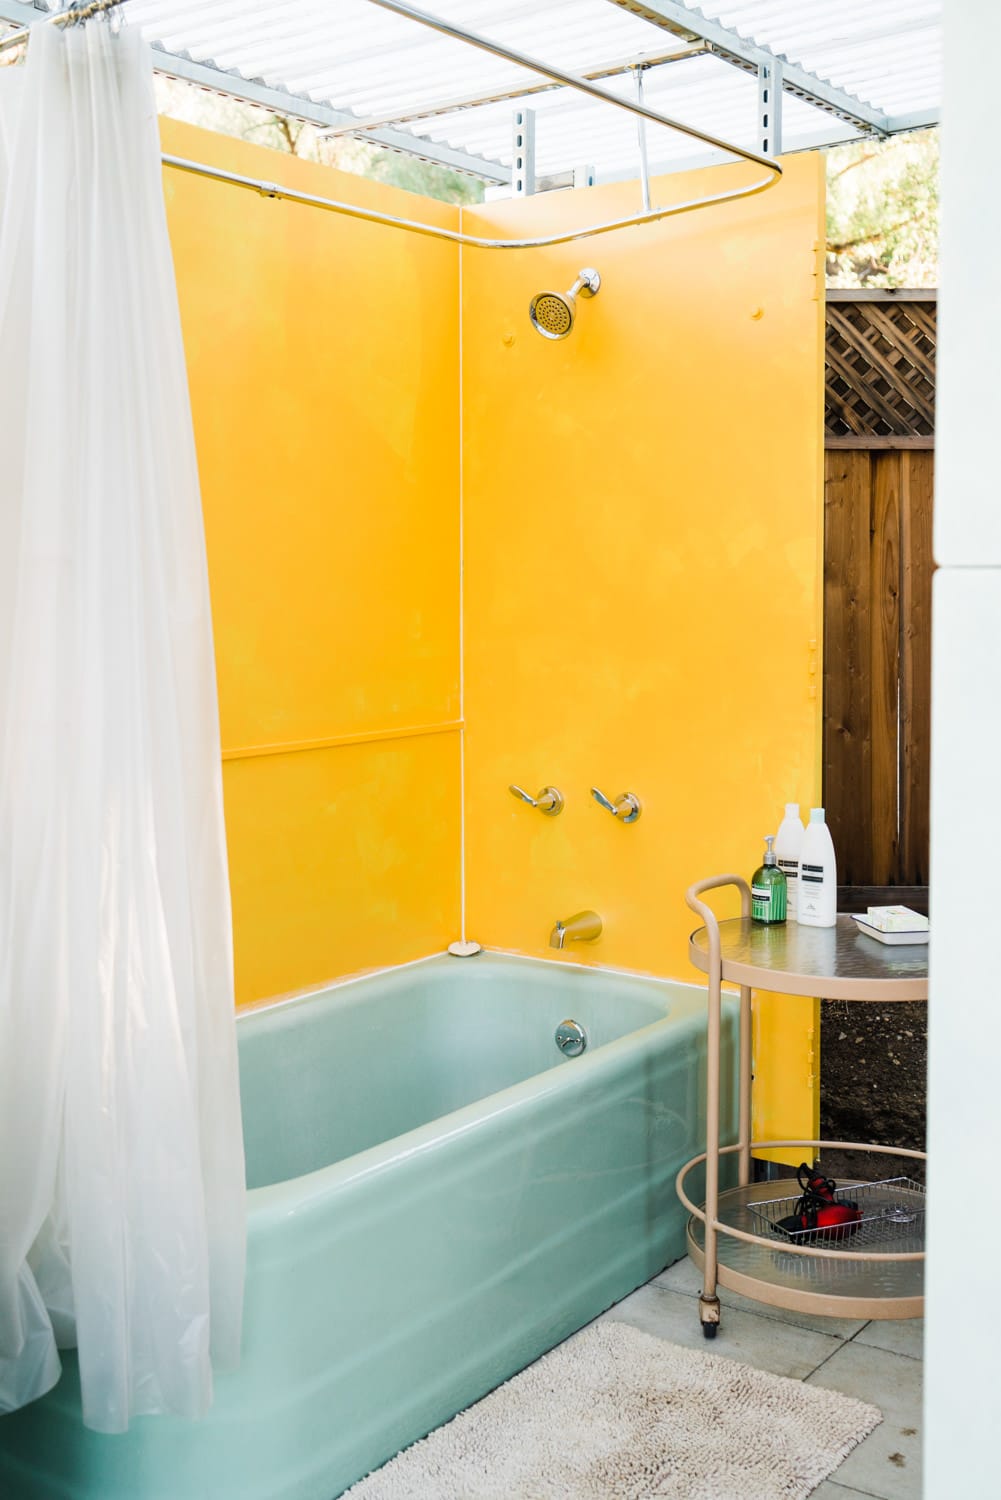 Everything you need to have a pleasant outdoor shower - maybe even a hot steaming bath?!